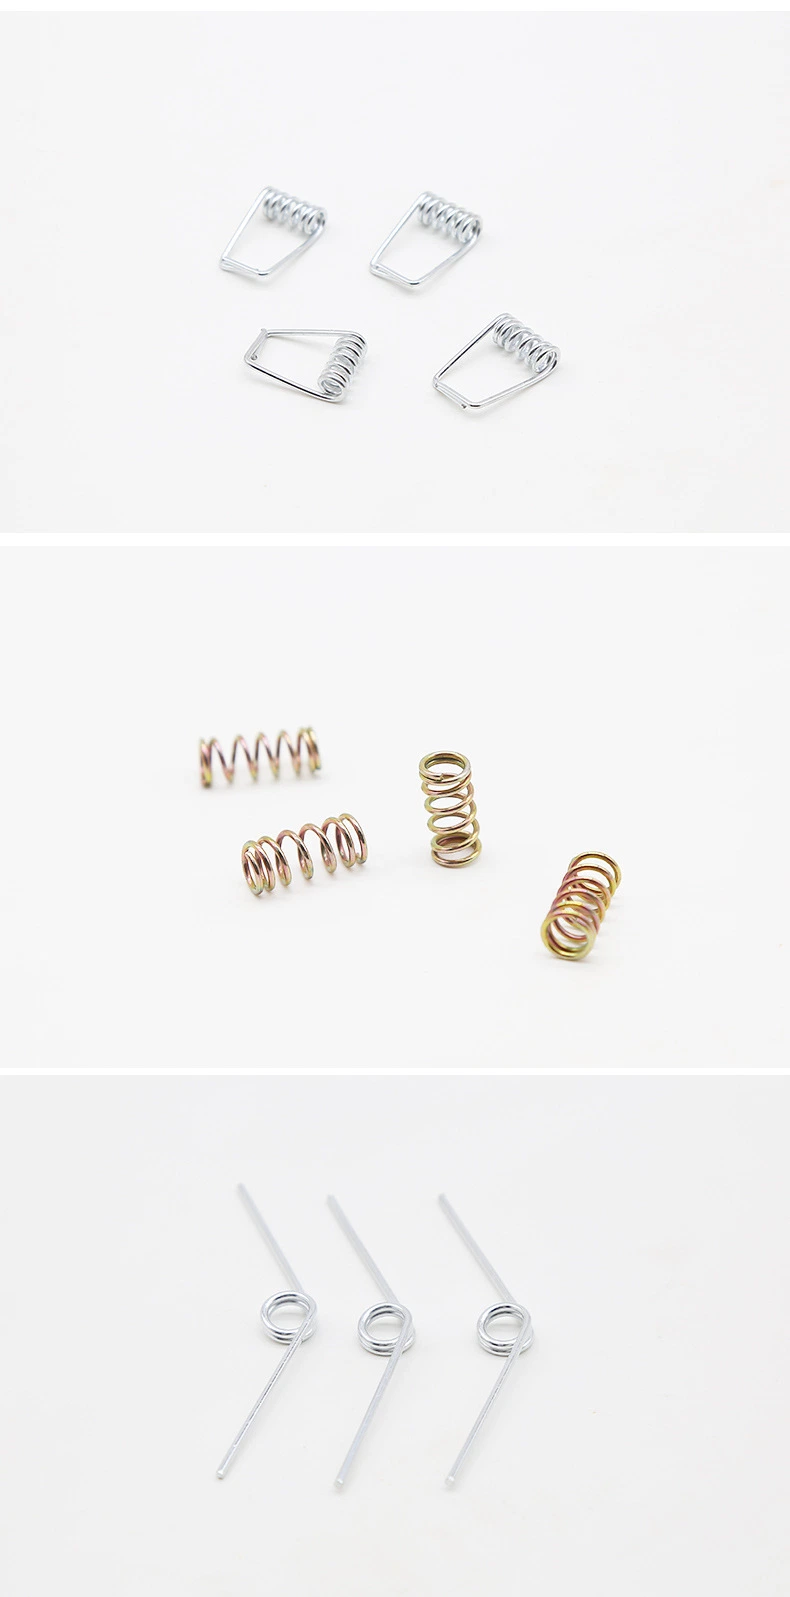 Customized Metal 0.1-4mm Diameter Stainless Sofa Flat Spring Steel Wire Mechanical Compression Springs